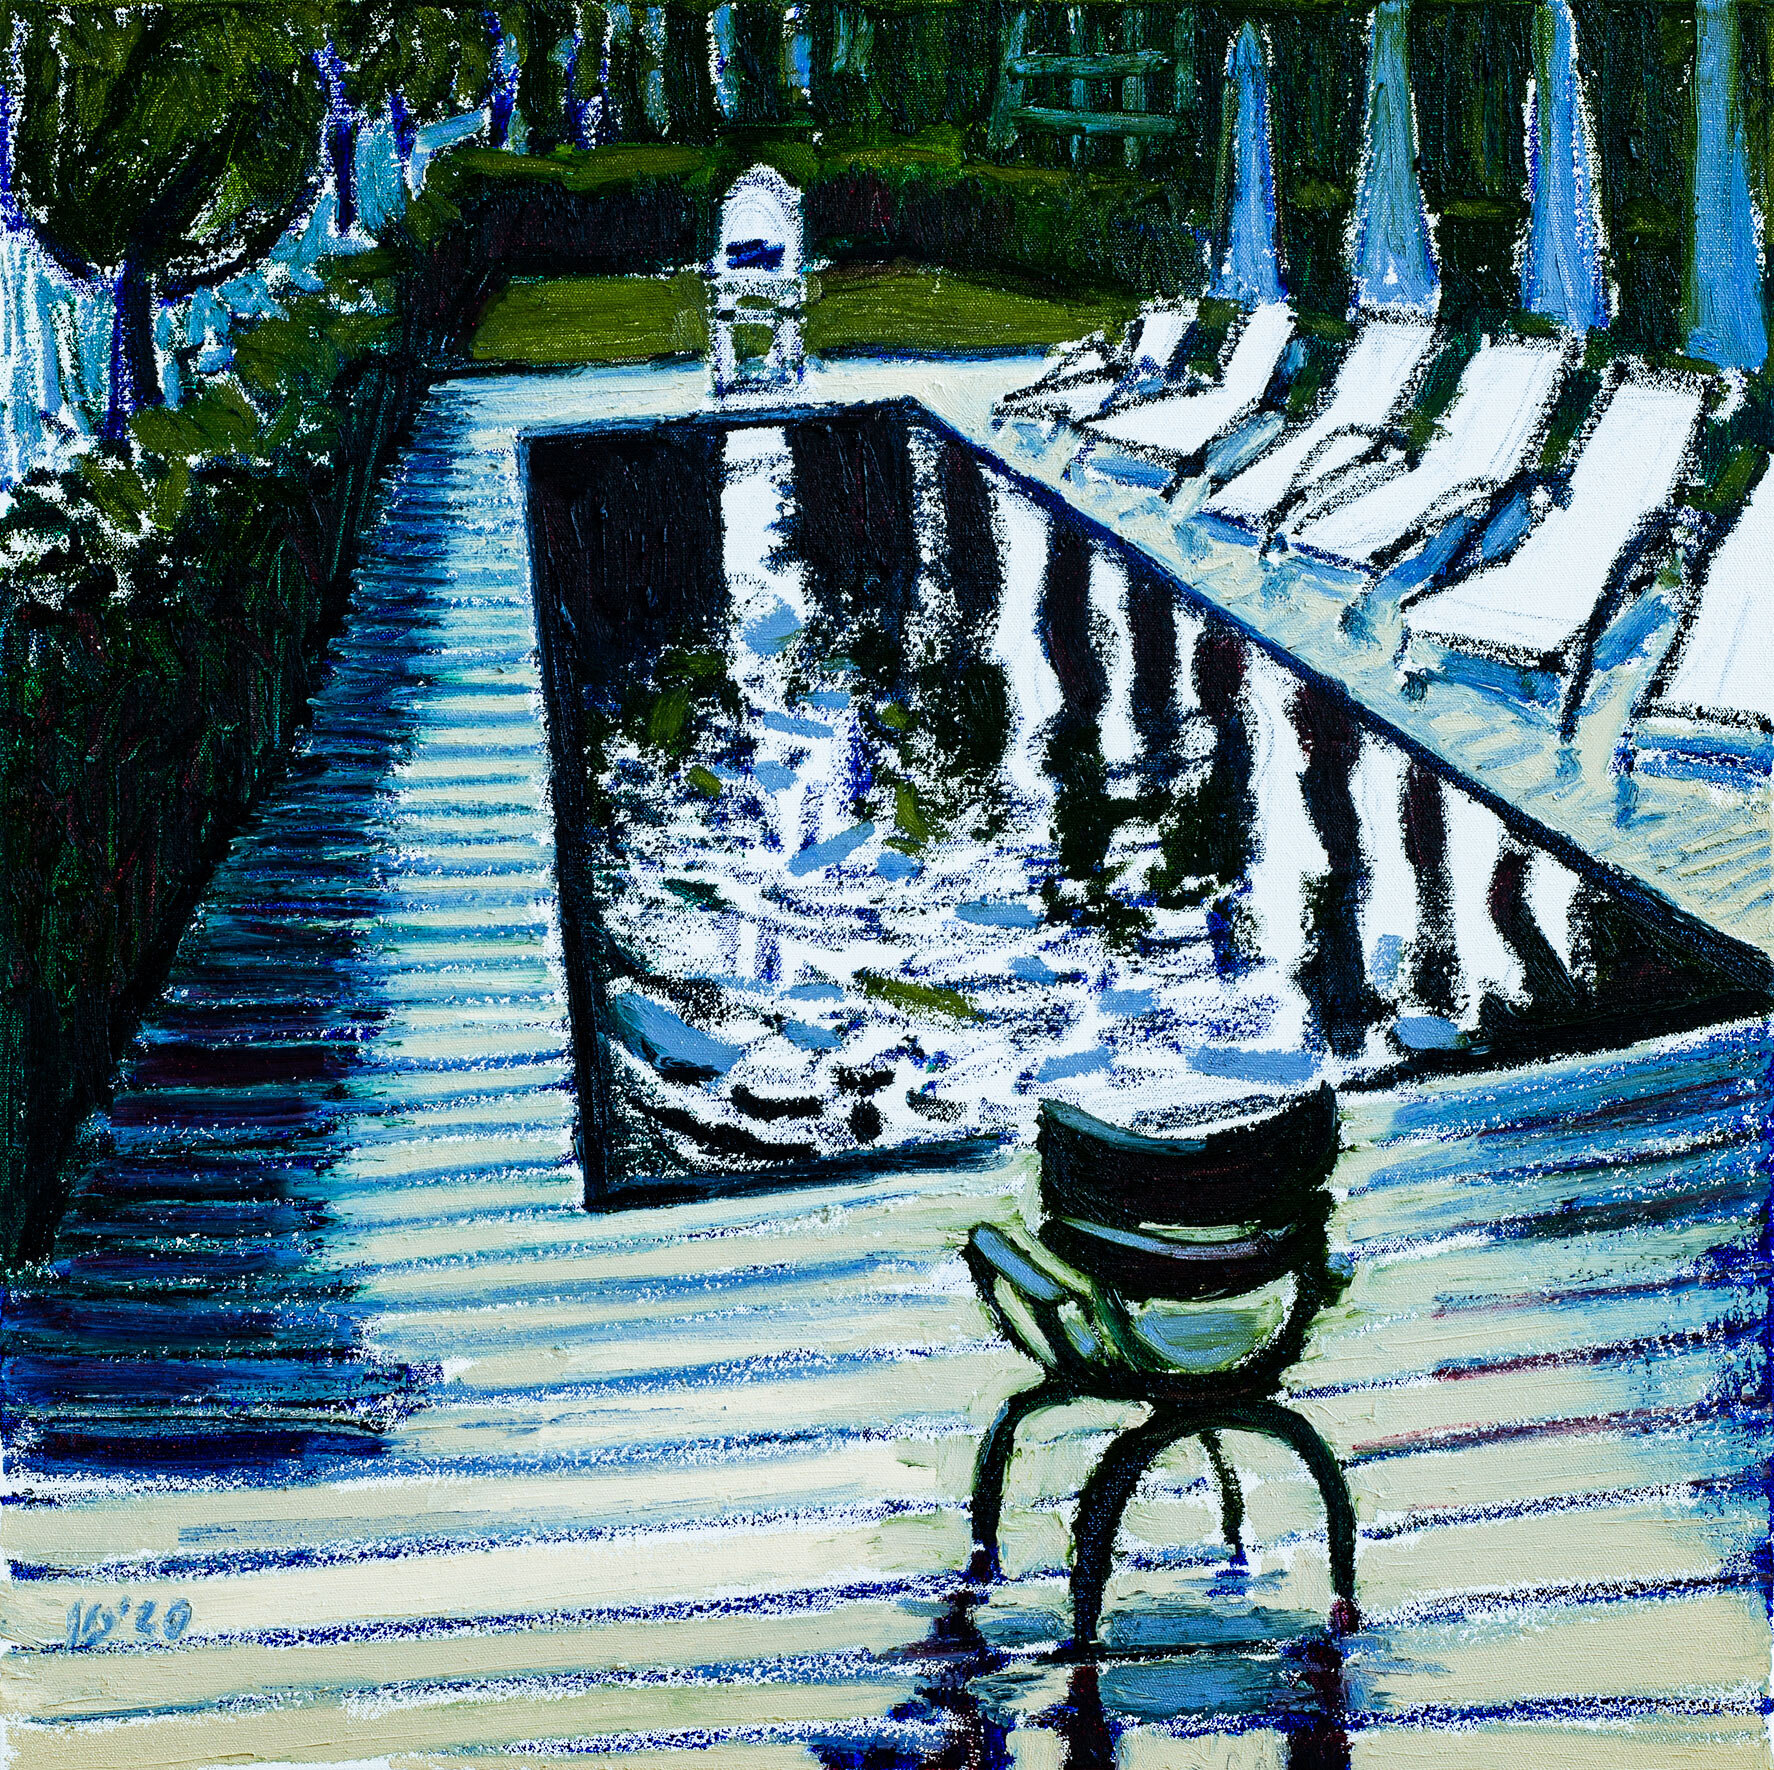 At the Pool, 2020 - oil sticks on canvas, 30x30in